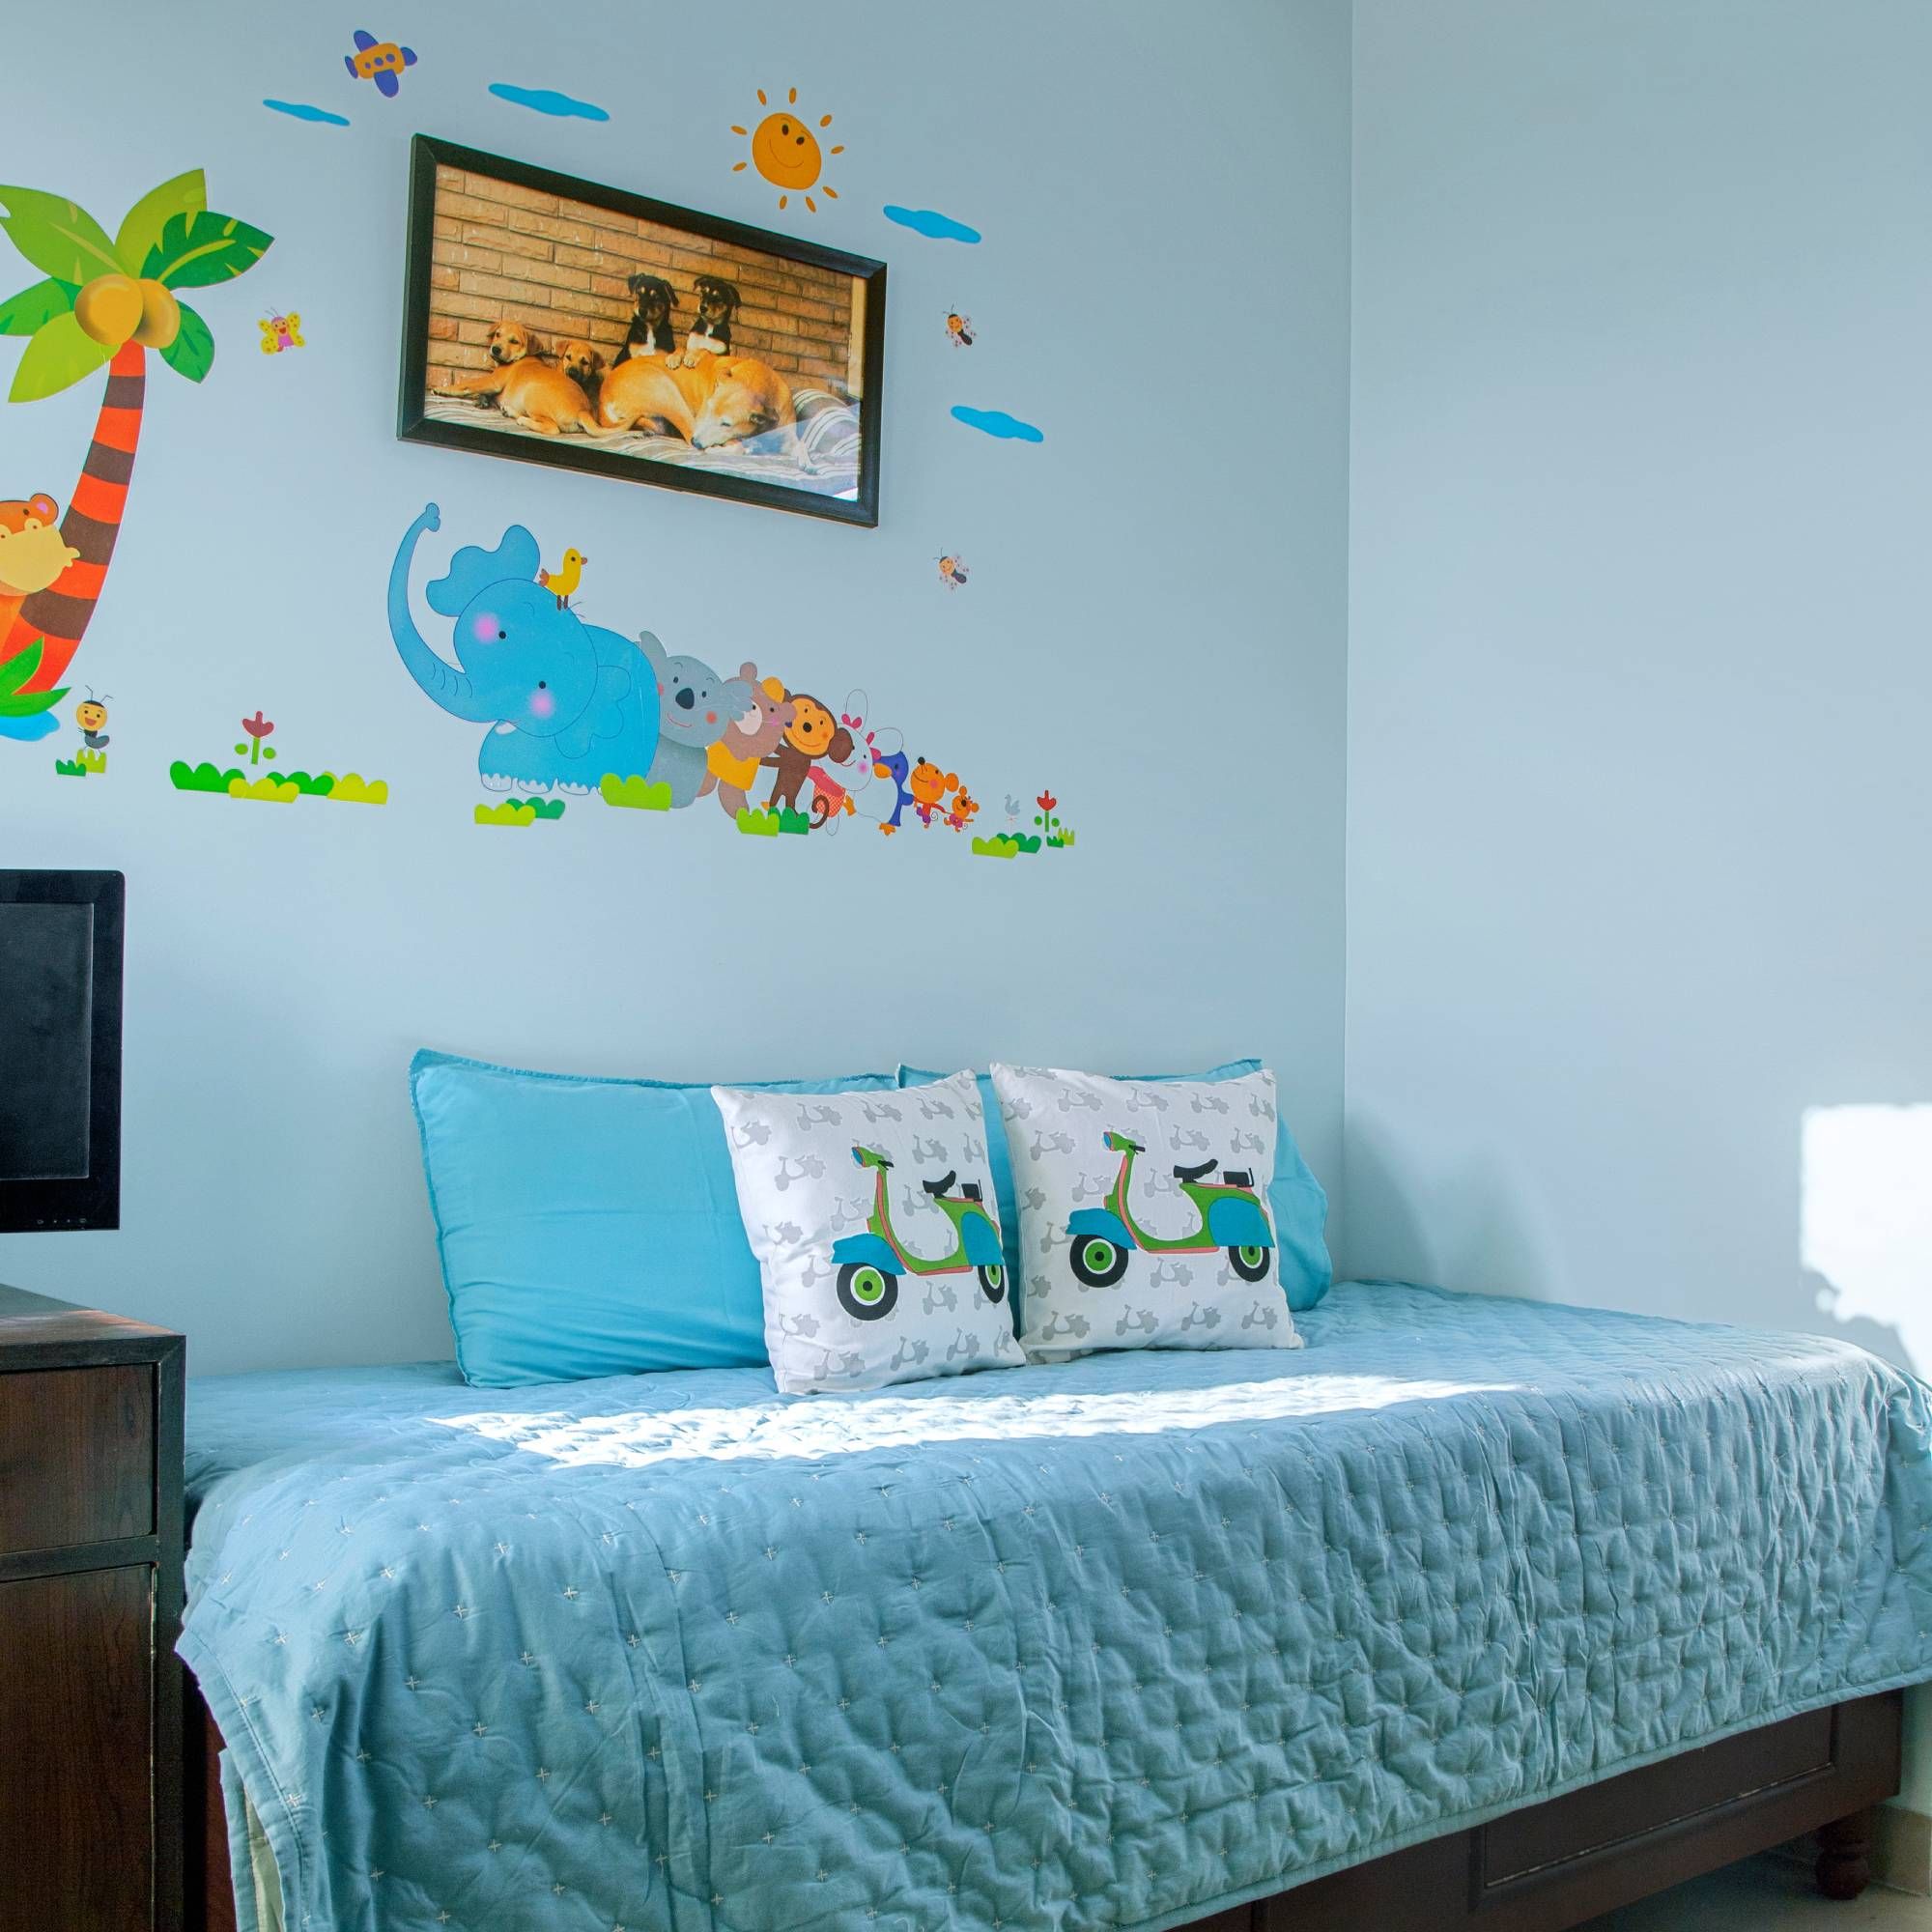 Modern Kids Room Design With A Cosy Blue Daybed